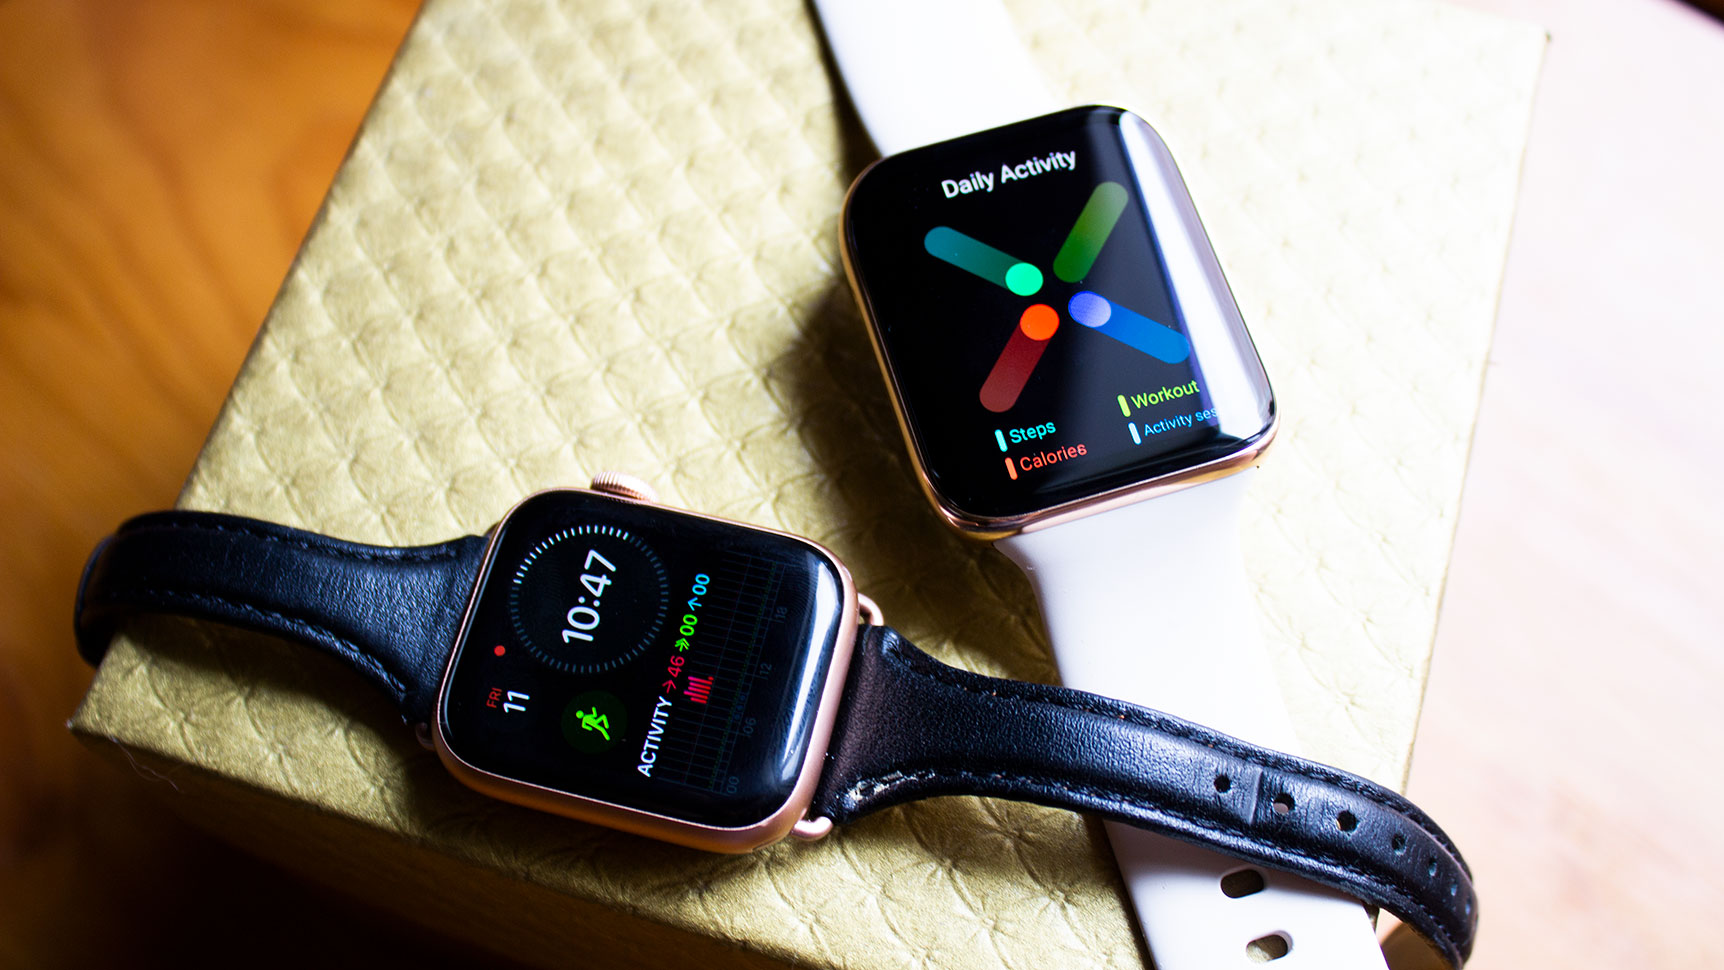 Look familiar? The Apple Watch Series 5 (left) and the Oppo Watch side-by-side. (Photo: Victoria Song/Gizmodo)